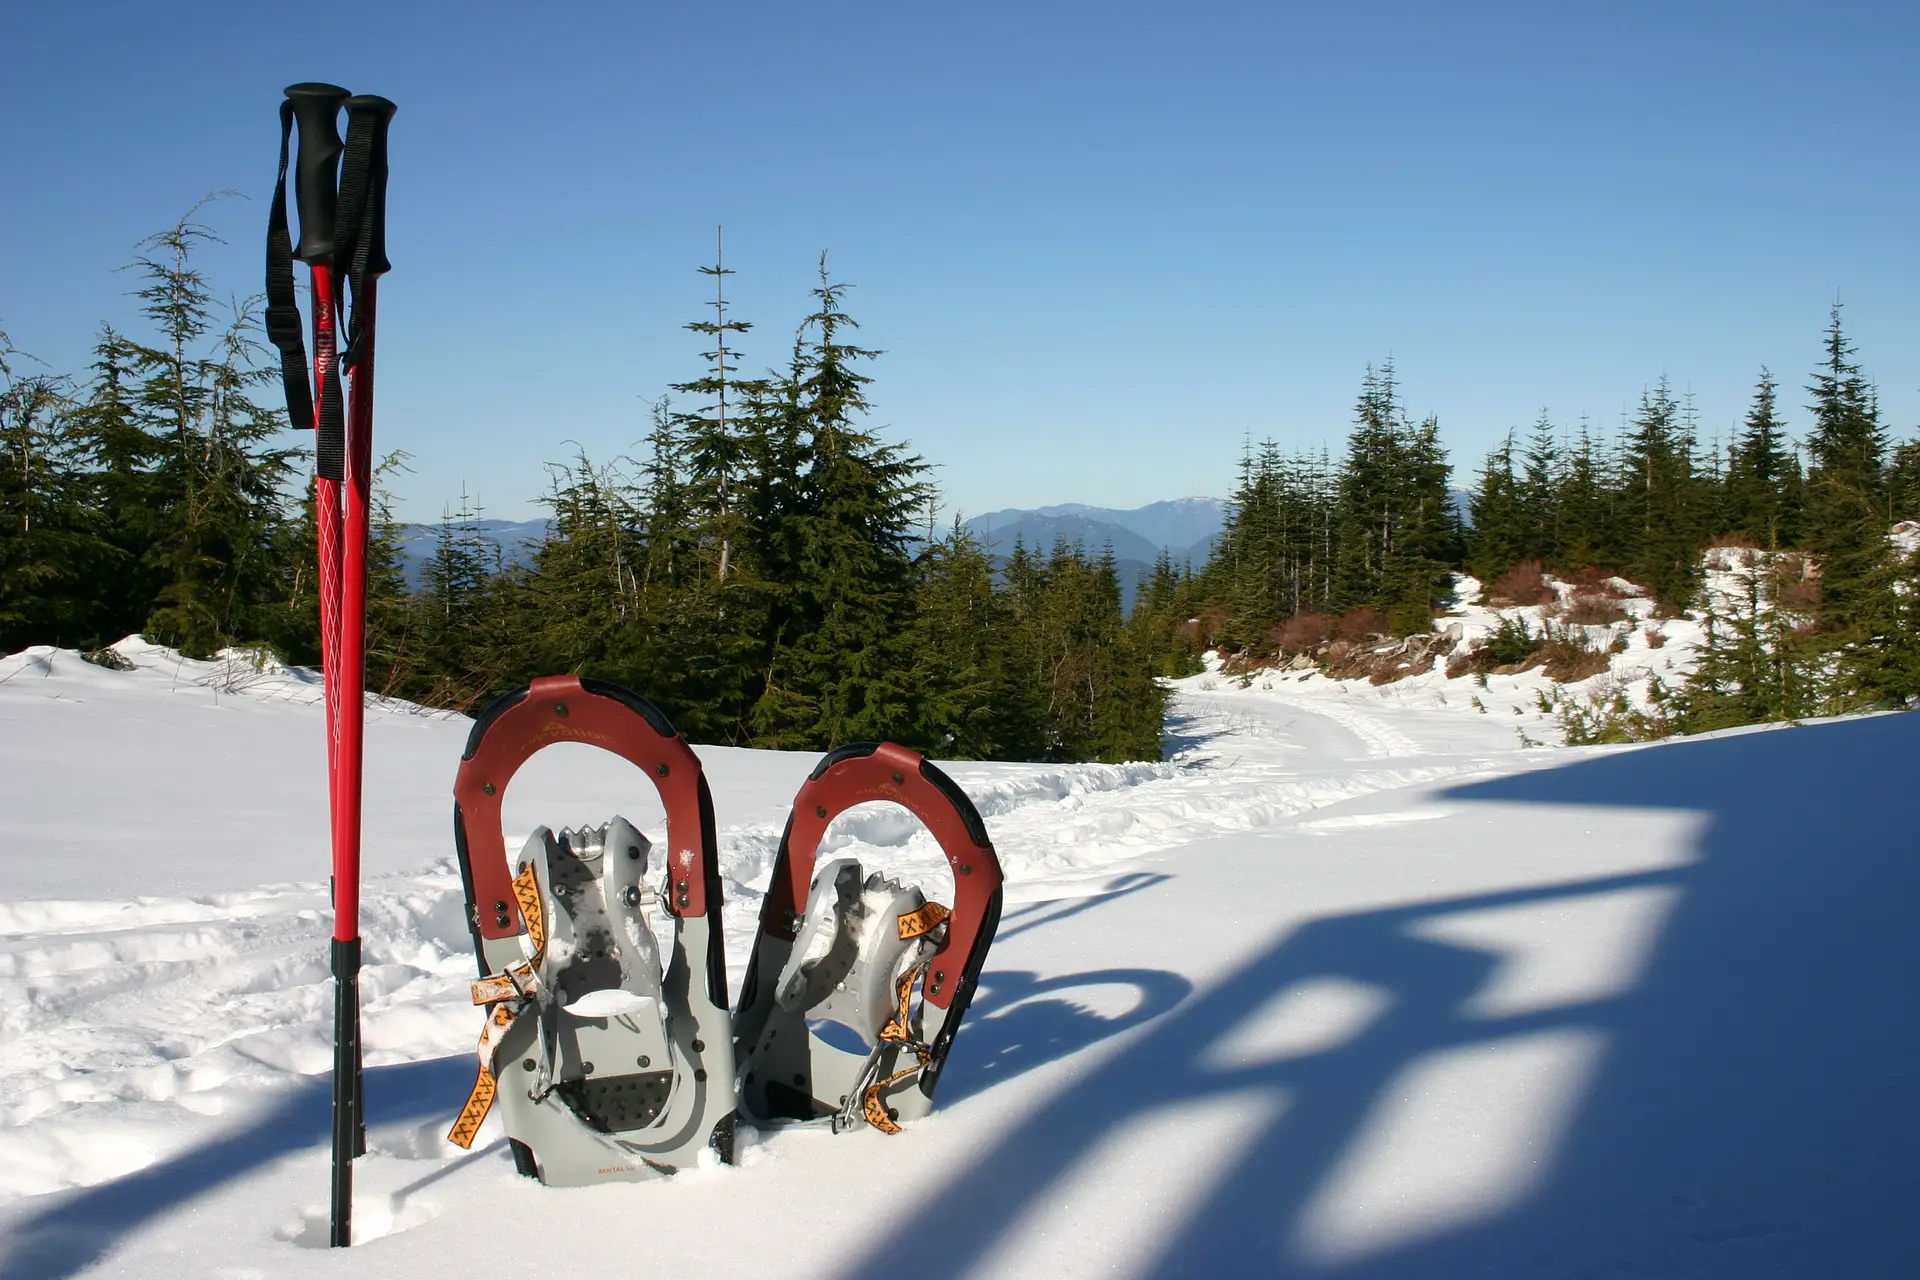 Snowshoes poles standing in the snow - Photo: Emma Larocque